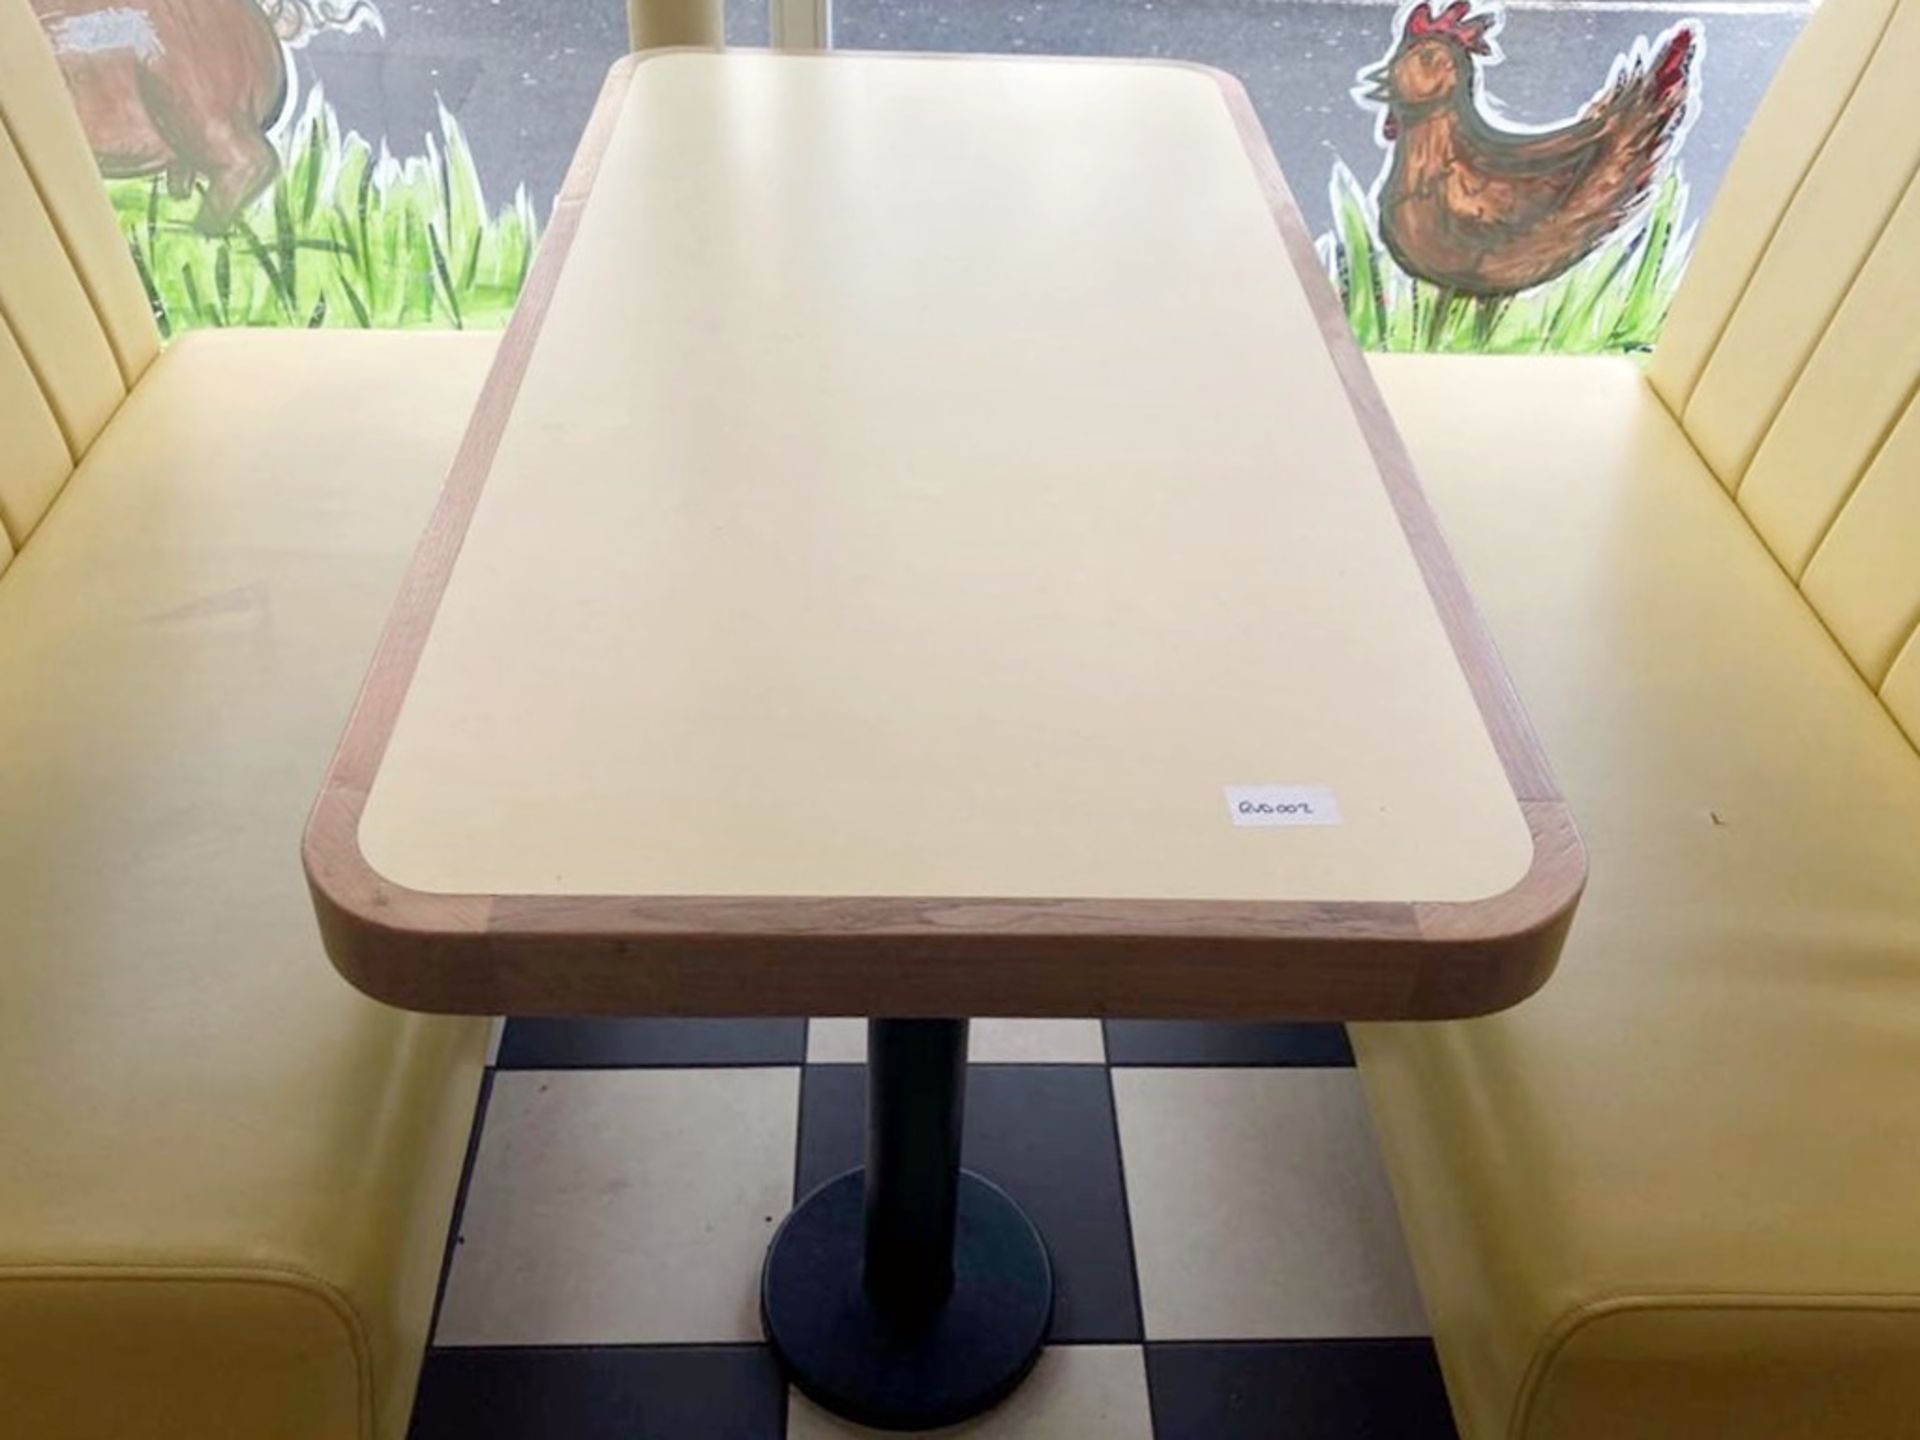 1 x Collection of Restaurant Seating Benches and Tables - Features a Light Wood and Faux Leather - Image 8 of 13